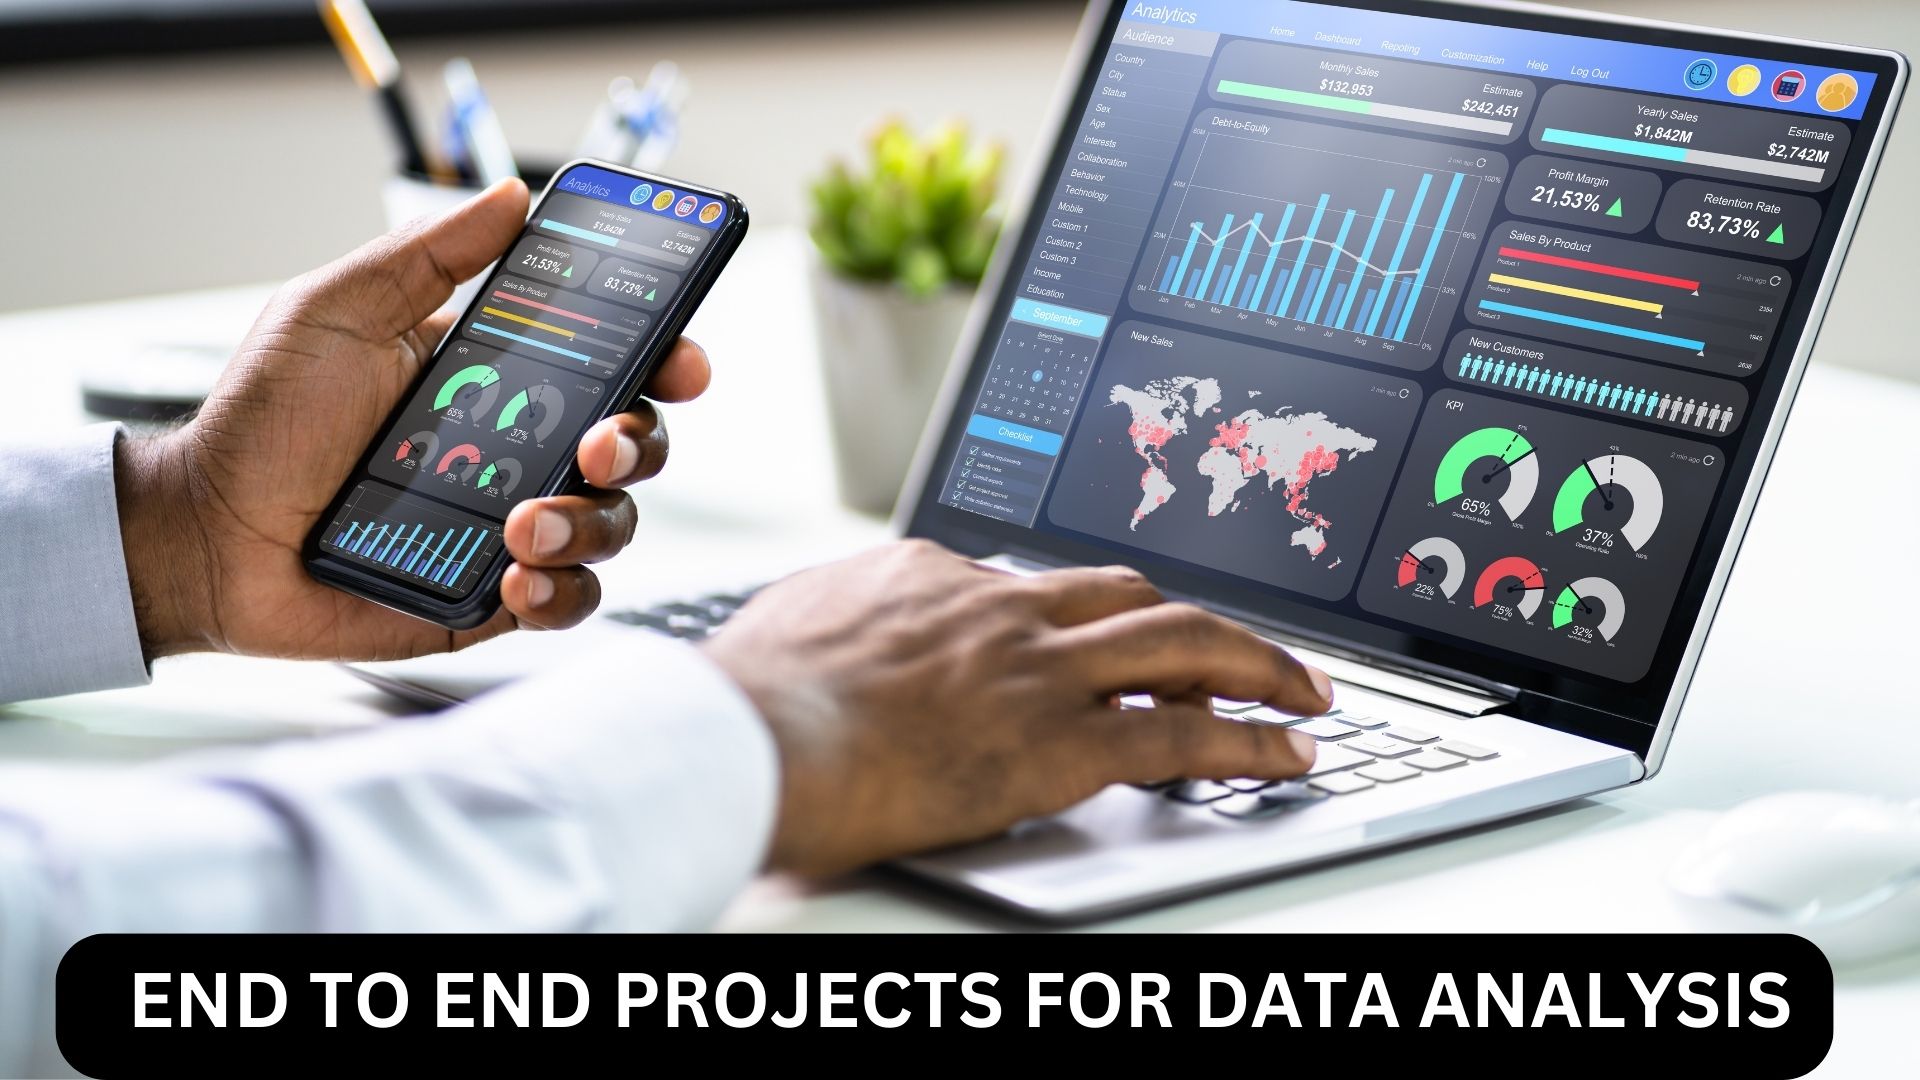 END TO END PROJECTS FOR DATA ANALYTICS